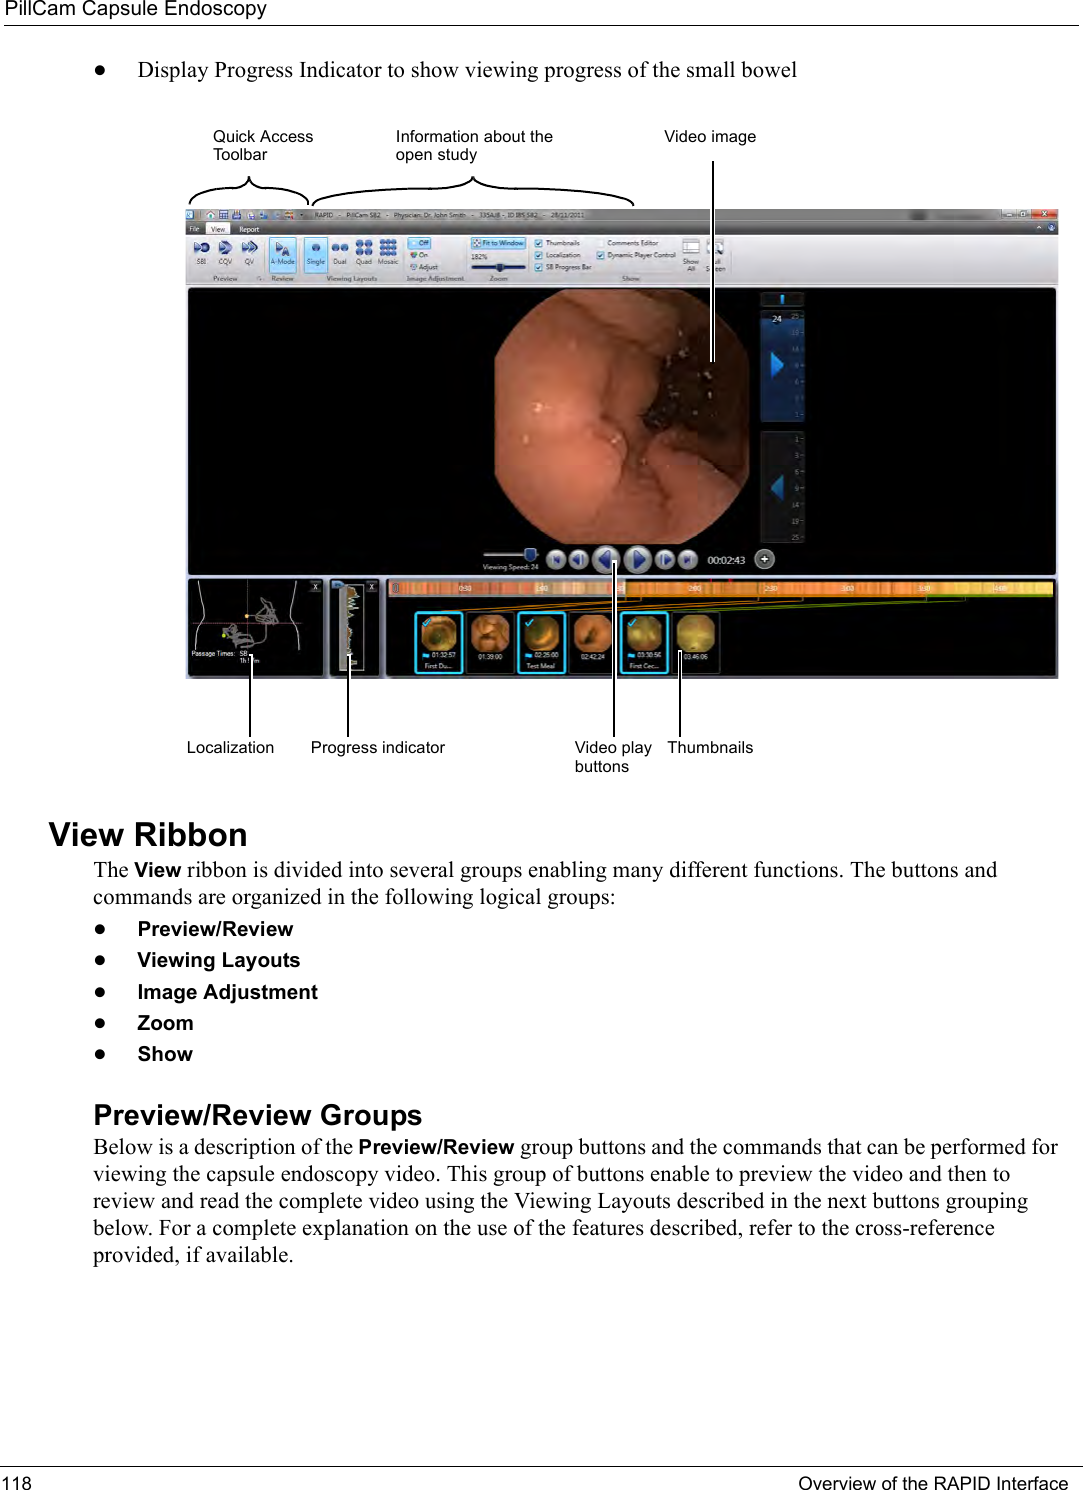 PillCam Capsule Endoscopy118 Overview of the RAPID Interface•Display Progress Indicator to show viewing progress of the small bowelView RibbonThe View ribbon is divided into several groups enabling many different functions. The buttons and commands are organized in the following logical groups:•Preview/Review•Viewing Layouts•Image Adjustment•Zoom•ShowPreview/Review GroupsBelow is a description of the Preview/Review group buttons and the commands that can be performed for viewing the capsule endoscopy video. This group of buttons enable to preview the video and then to review and read the complete video using the Viewing Layouts described in the next buttons grouping below. For a complete explanation on the use of the features described, refer to the cross-reference provided, if available. Information about the open studyQuick Access ToolbarVideo imageVideo play buttonsLocalization Progress indicator Thumbnails